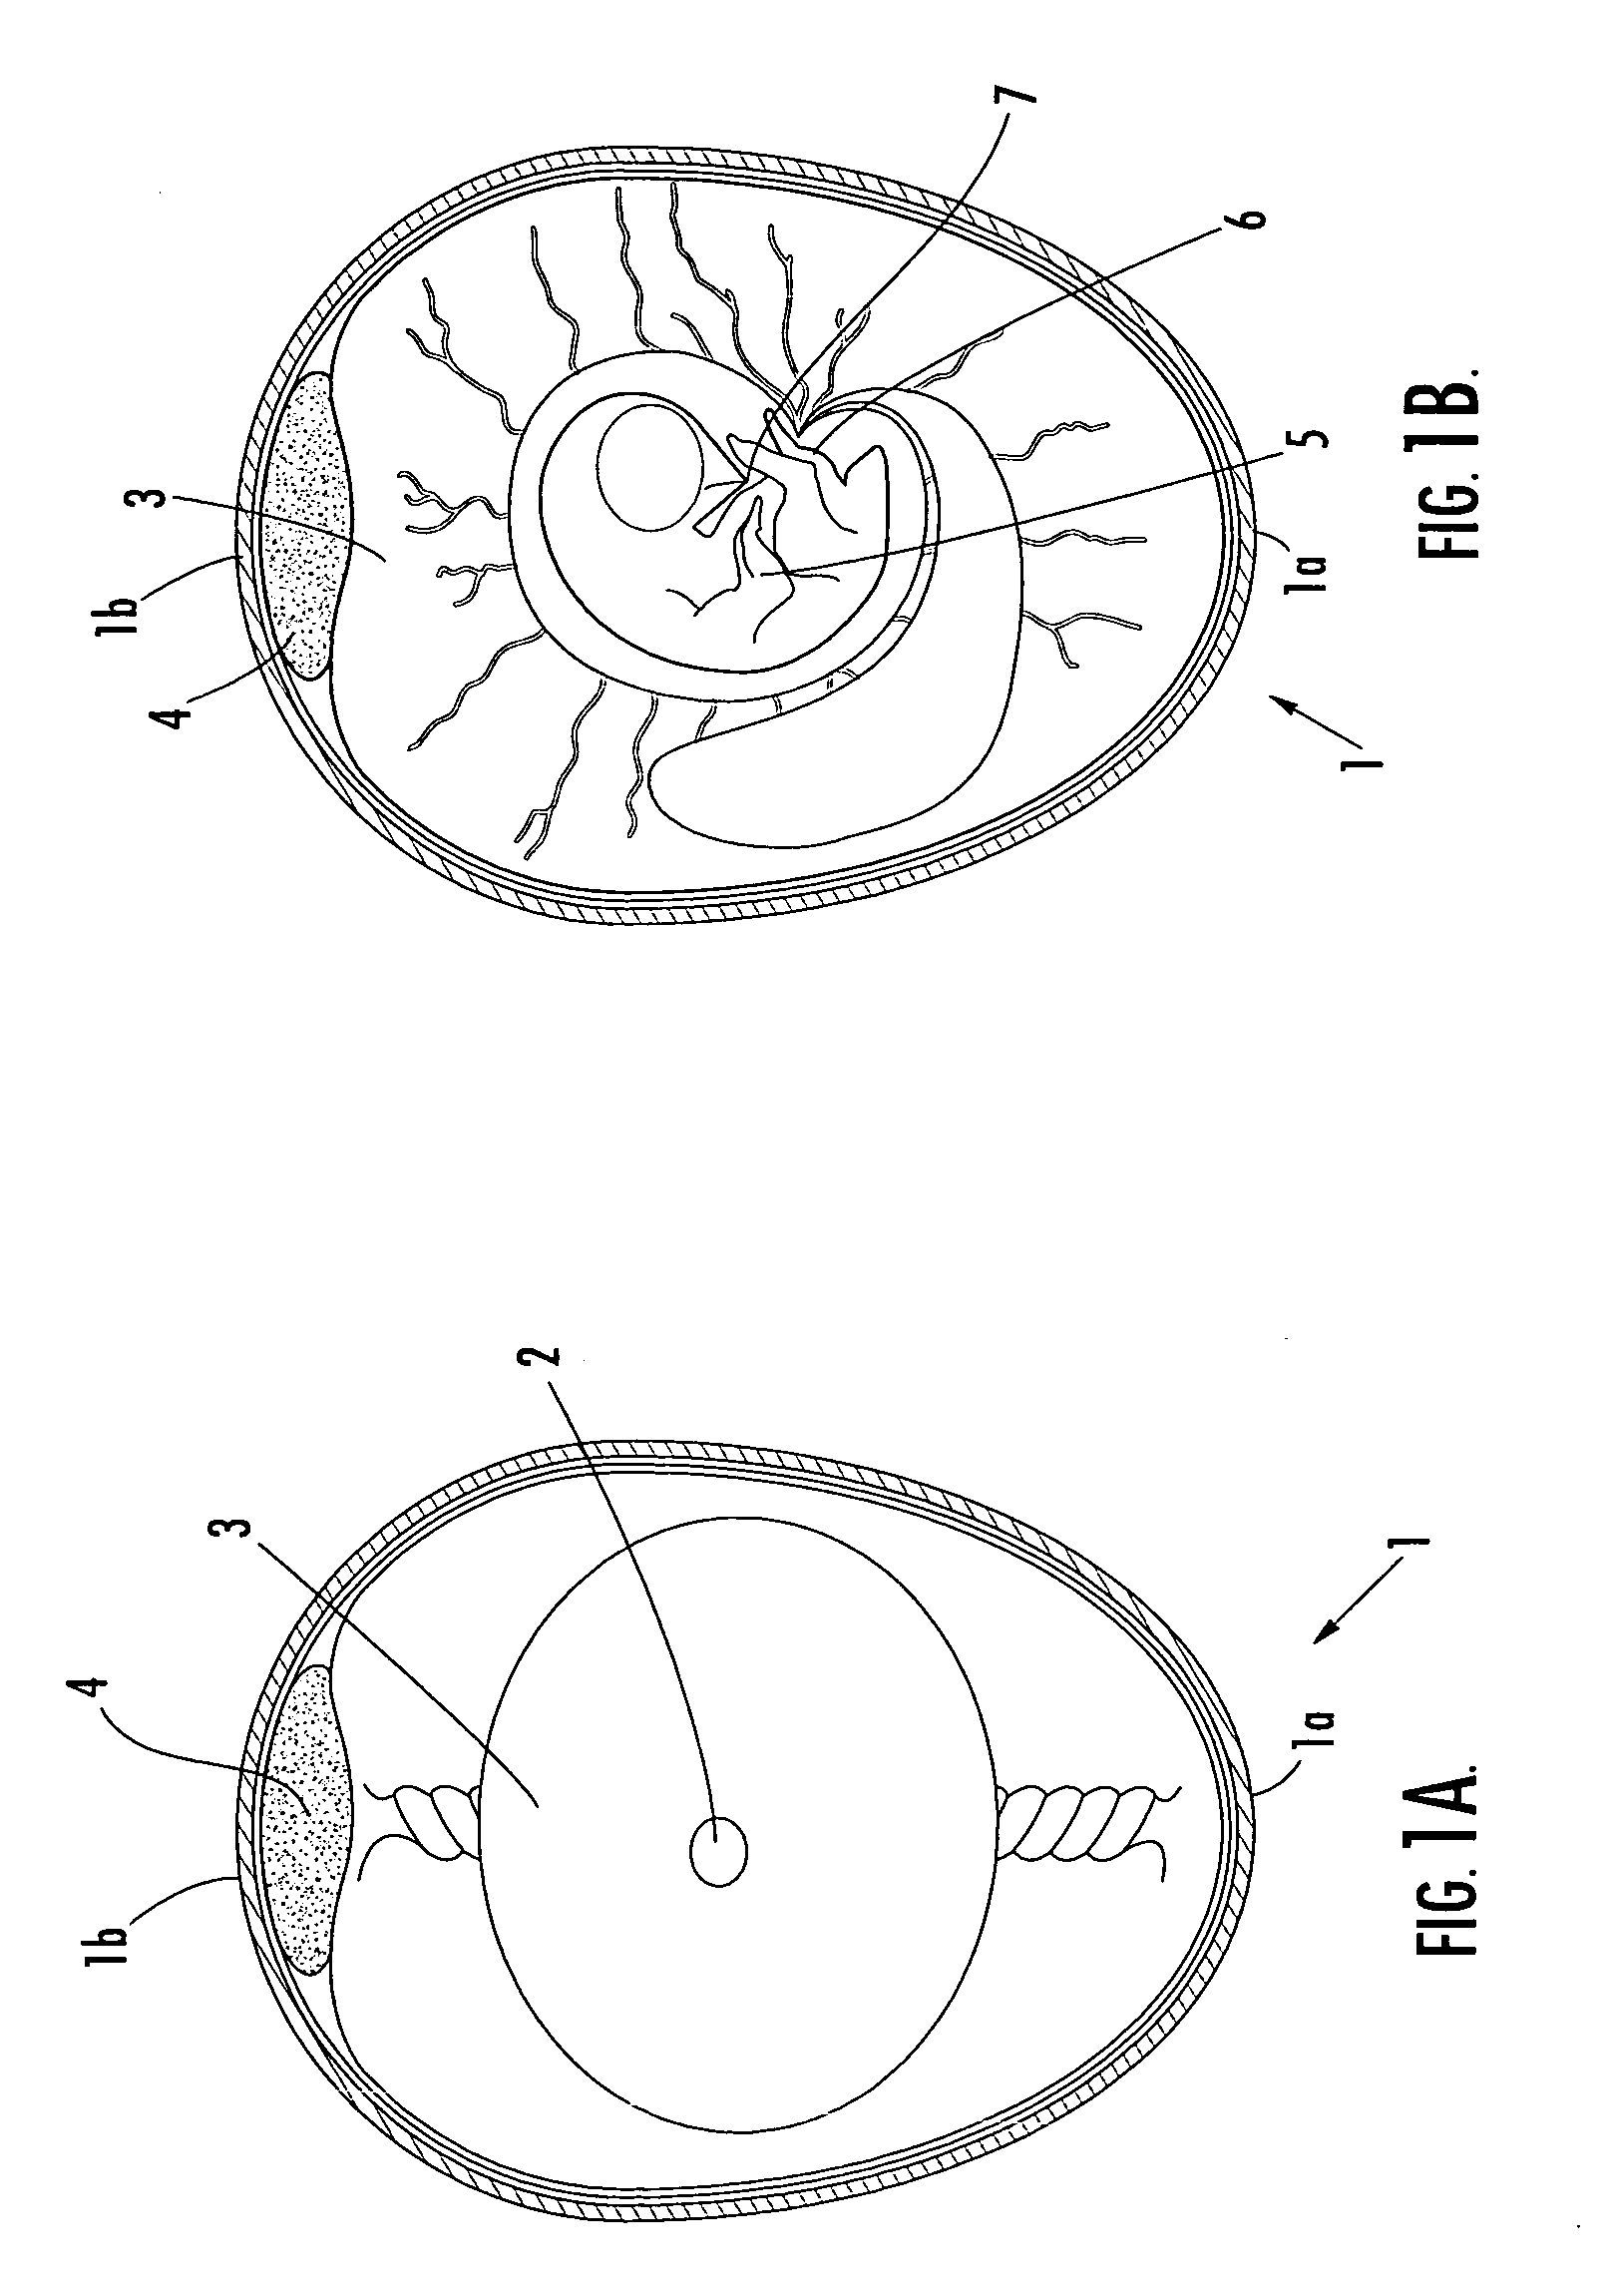 Methods and apparatus for harvesting vaccine from eggs